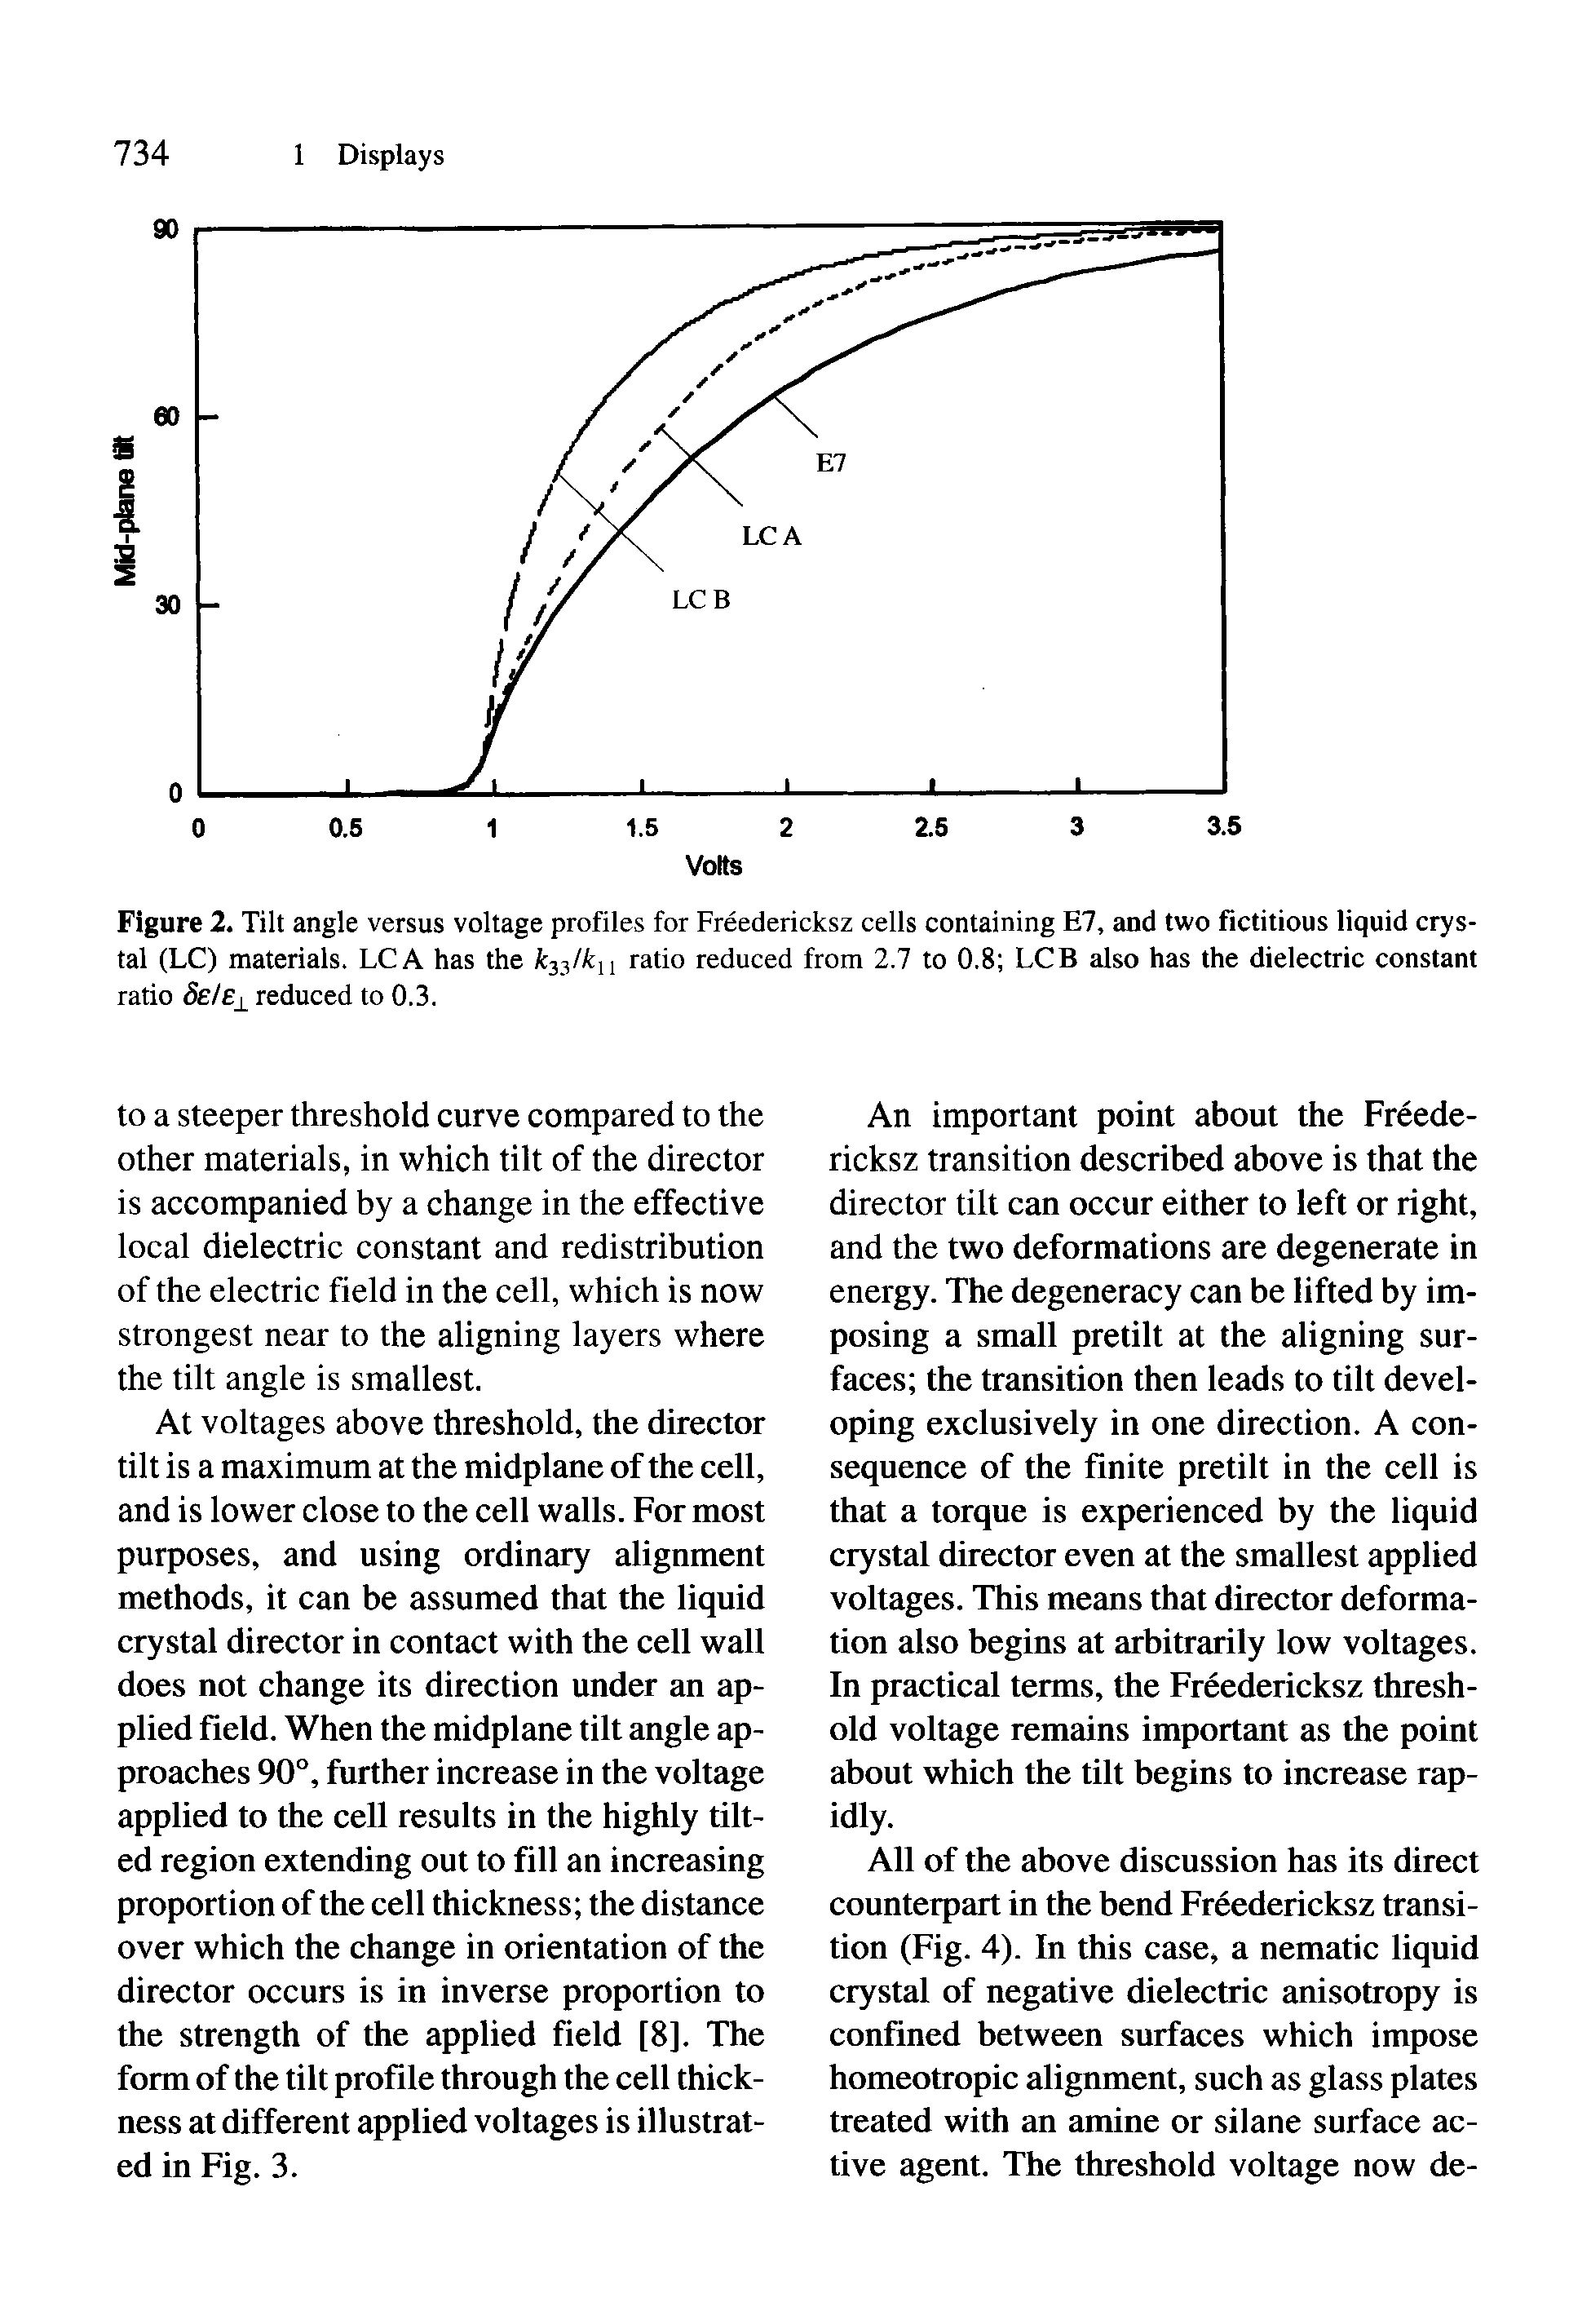 Figure 2. Tilt angle versus voltage profiles for Freedericksz cells containing E7, and two fictitious liquid crystal (LC) materials. LCA has the 33/ 11 ratio reduced from 2.7 to 0.8 LCB also has the dielectric constant ratio 8eIe reduced to 0.3.